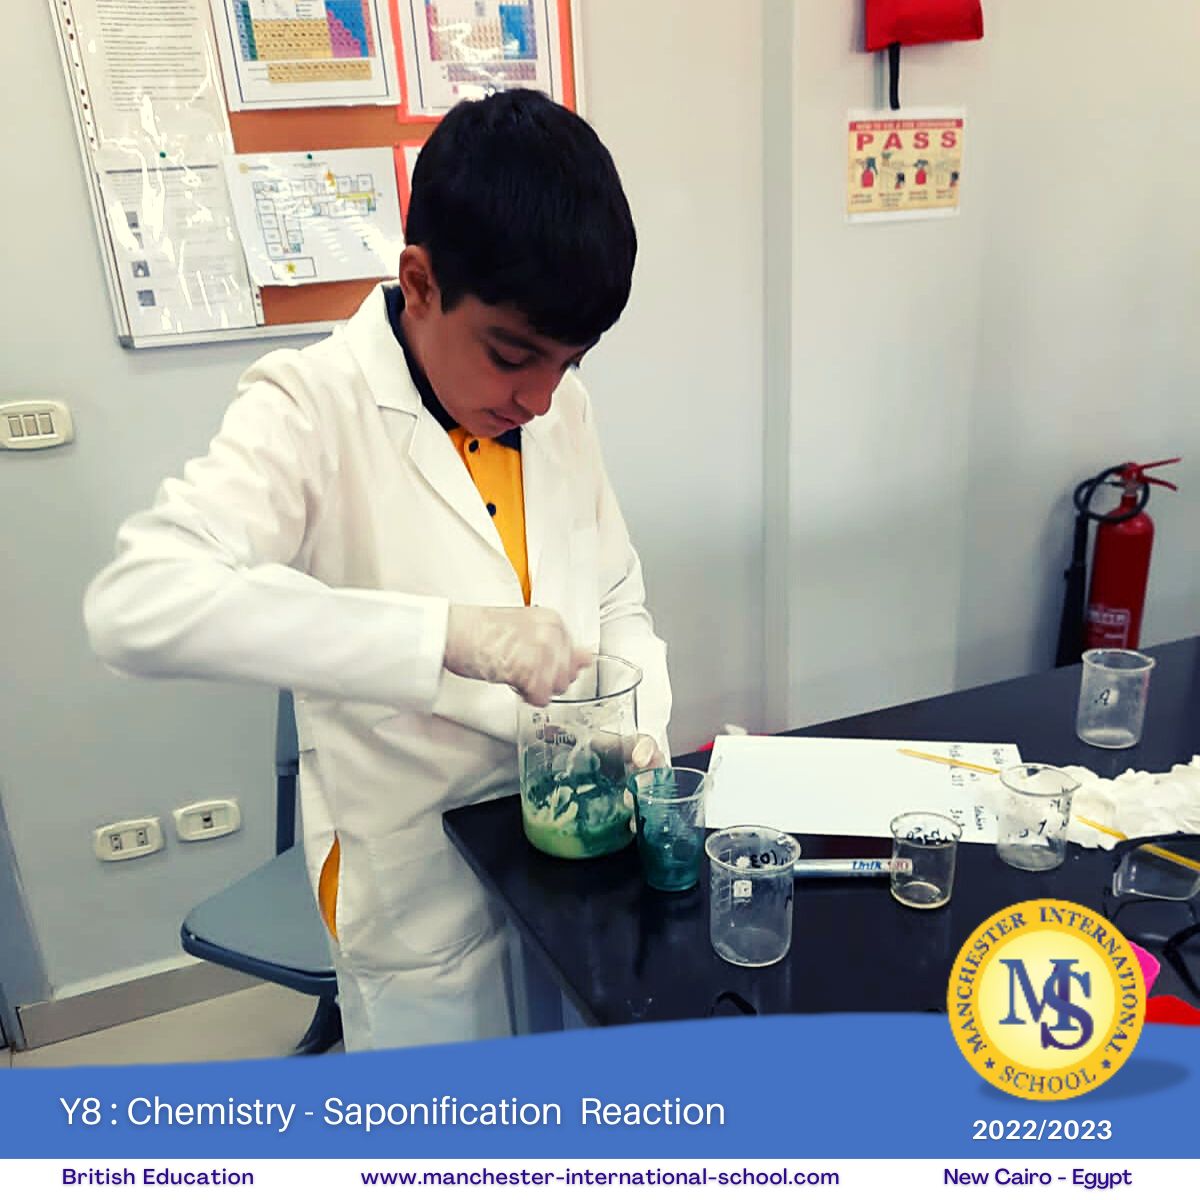 Y8 : Chemistry – Saponification eaction